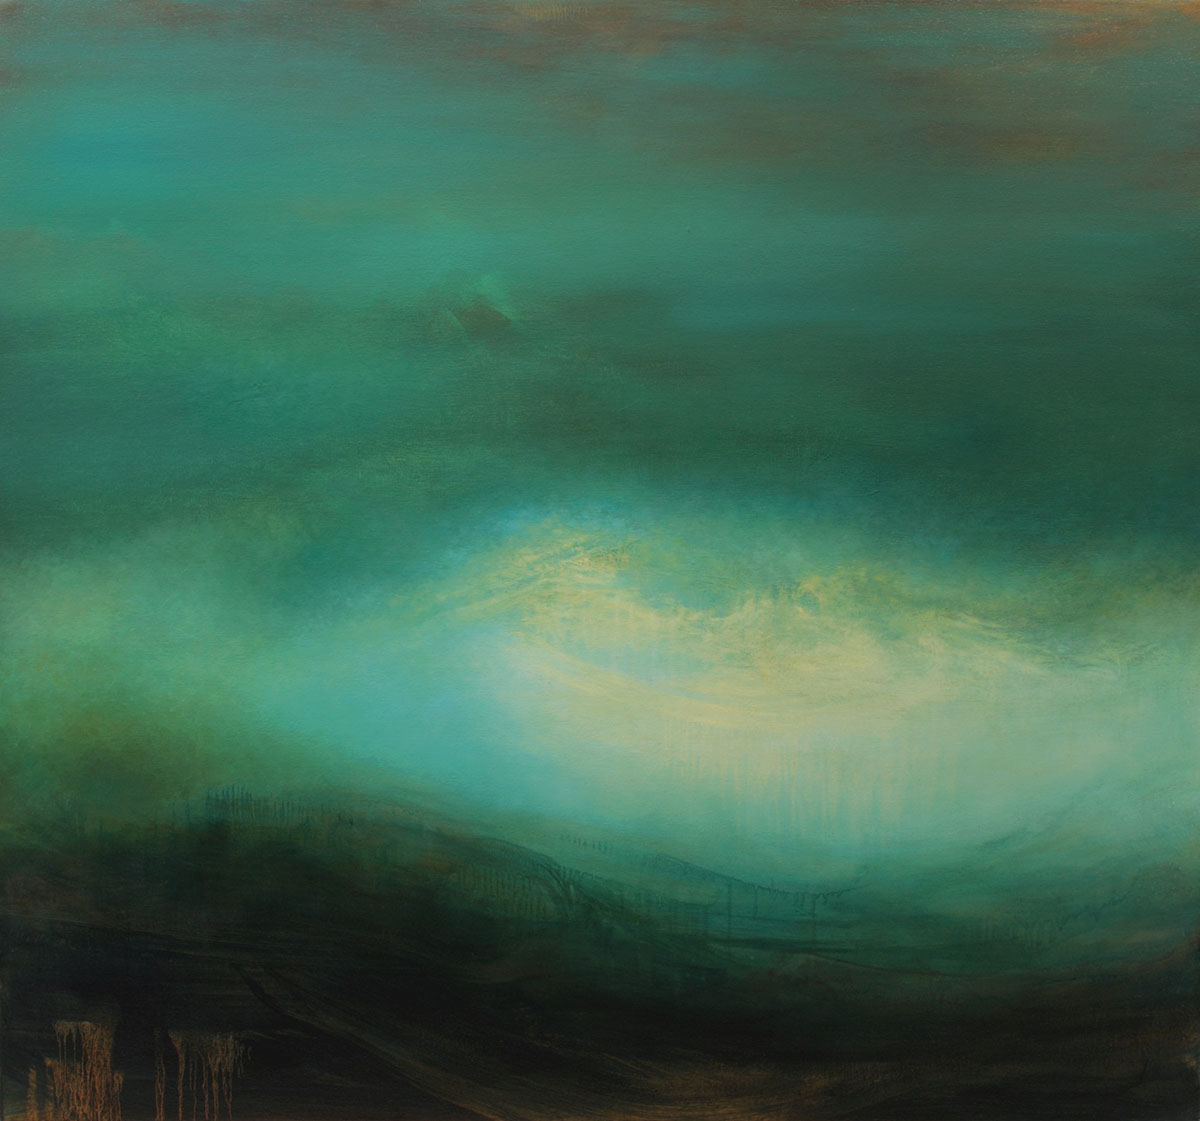 Oceanscape Abstract Art by Samantha Keely Smith